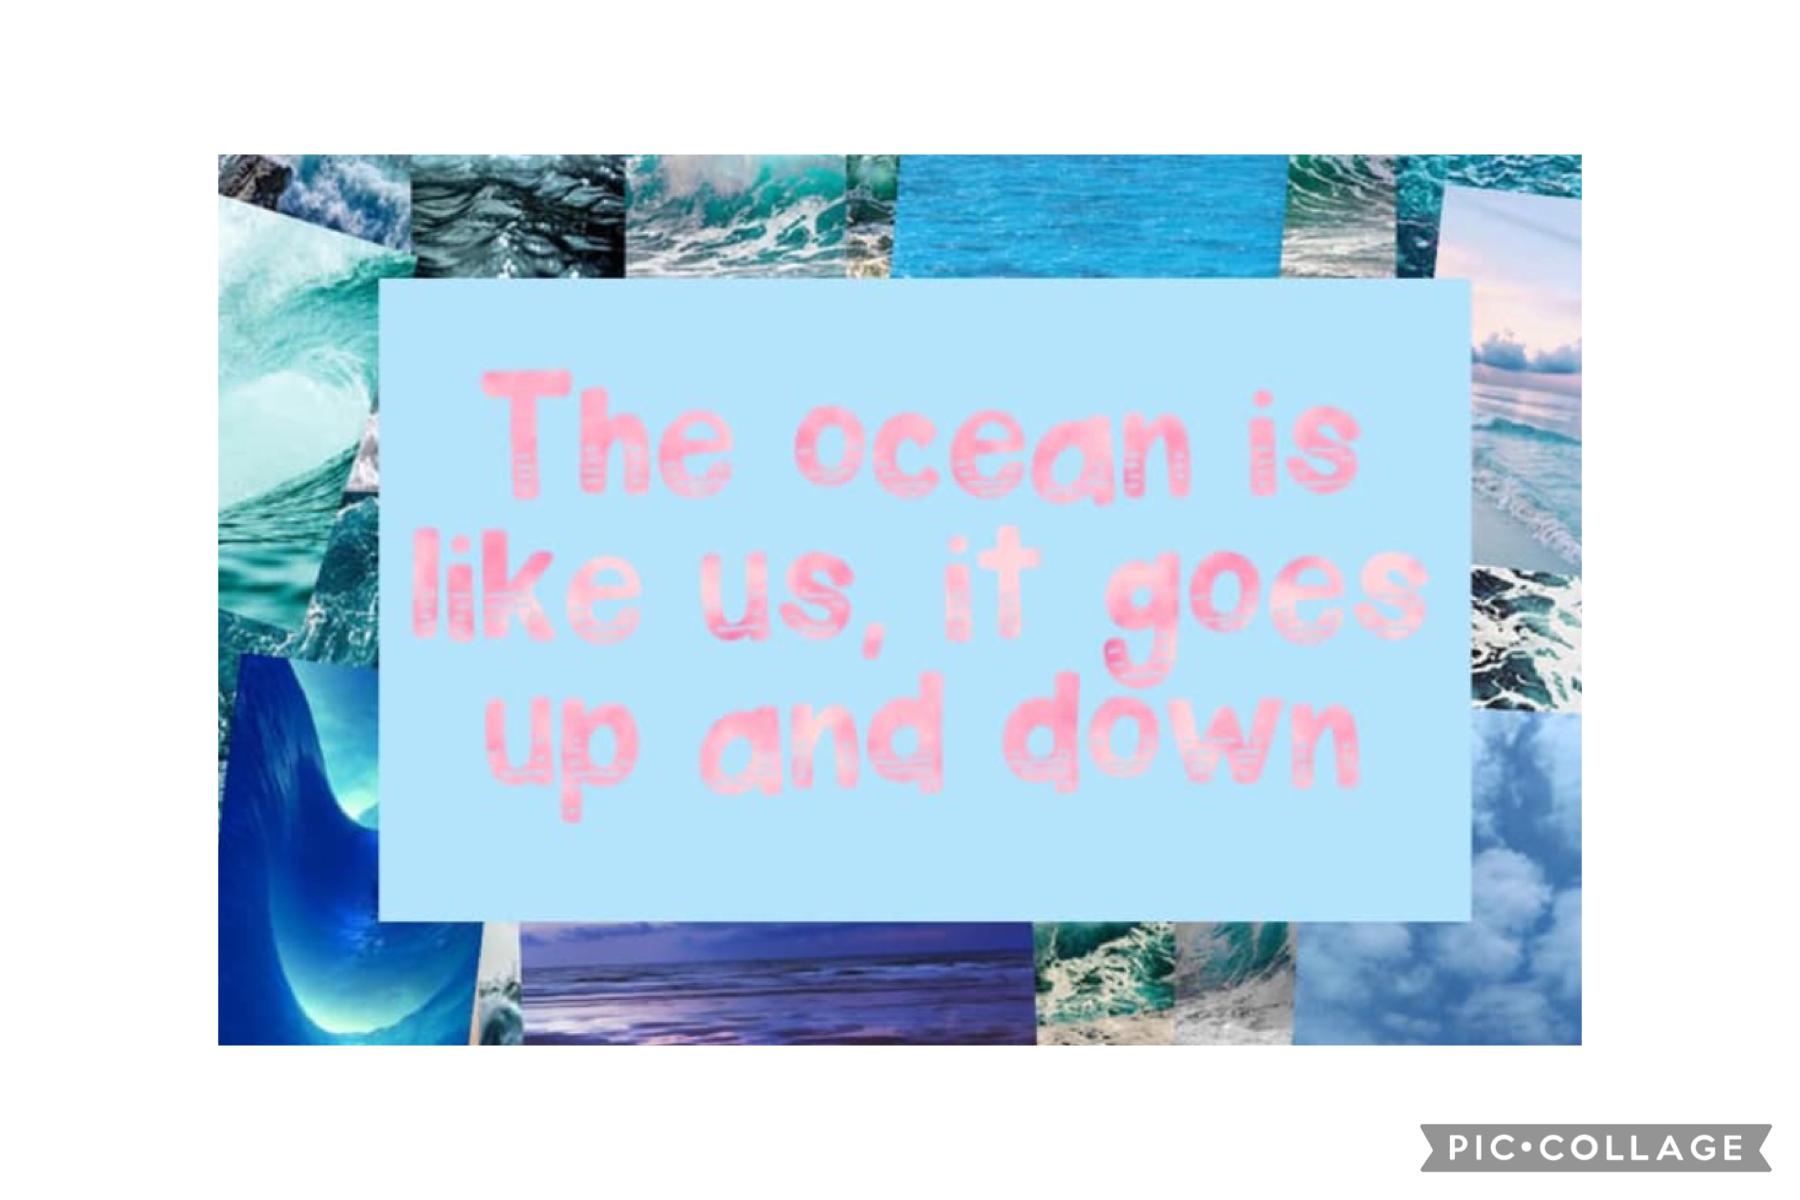 Collab with…..Ice_Quotes! Go follow them now!